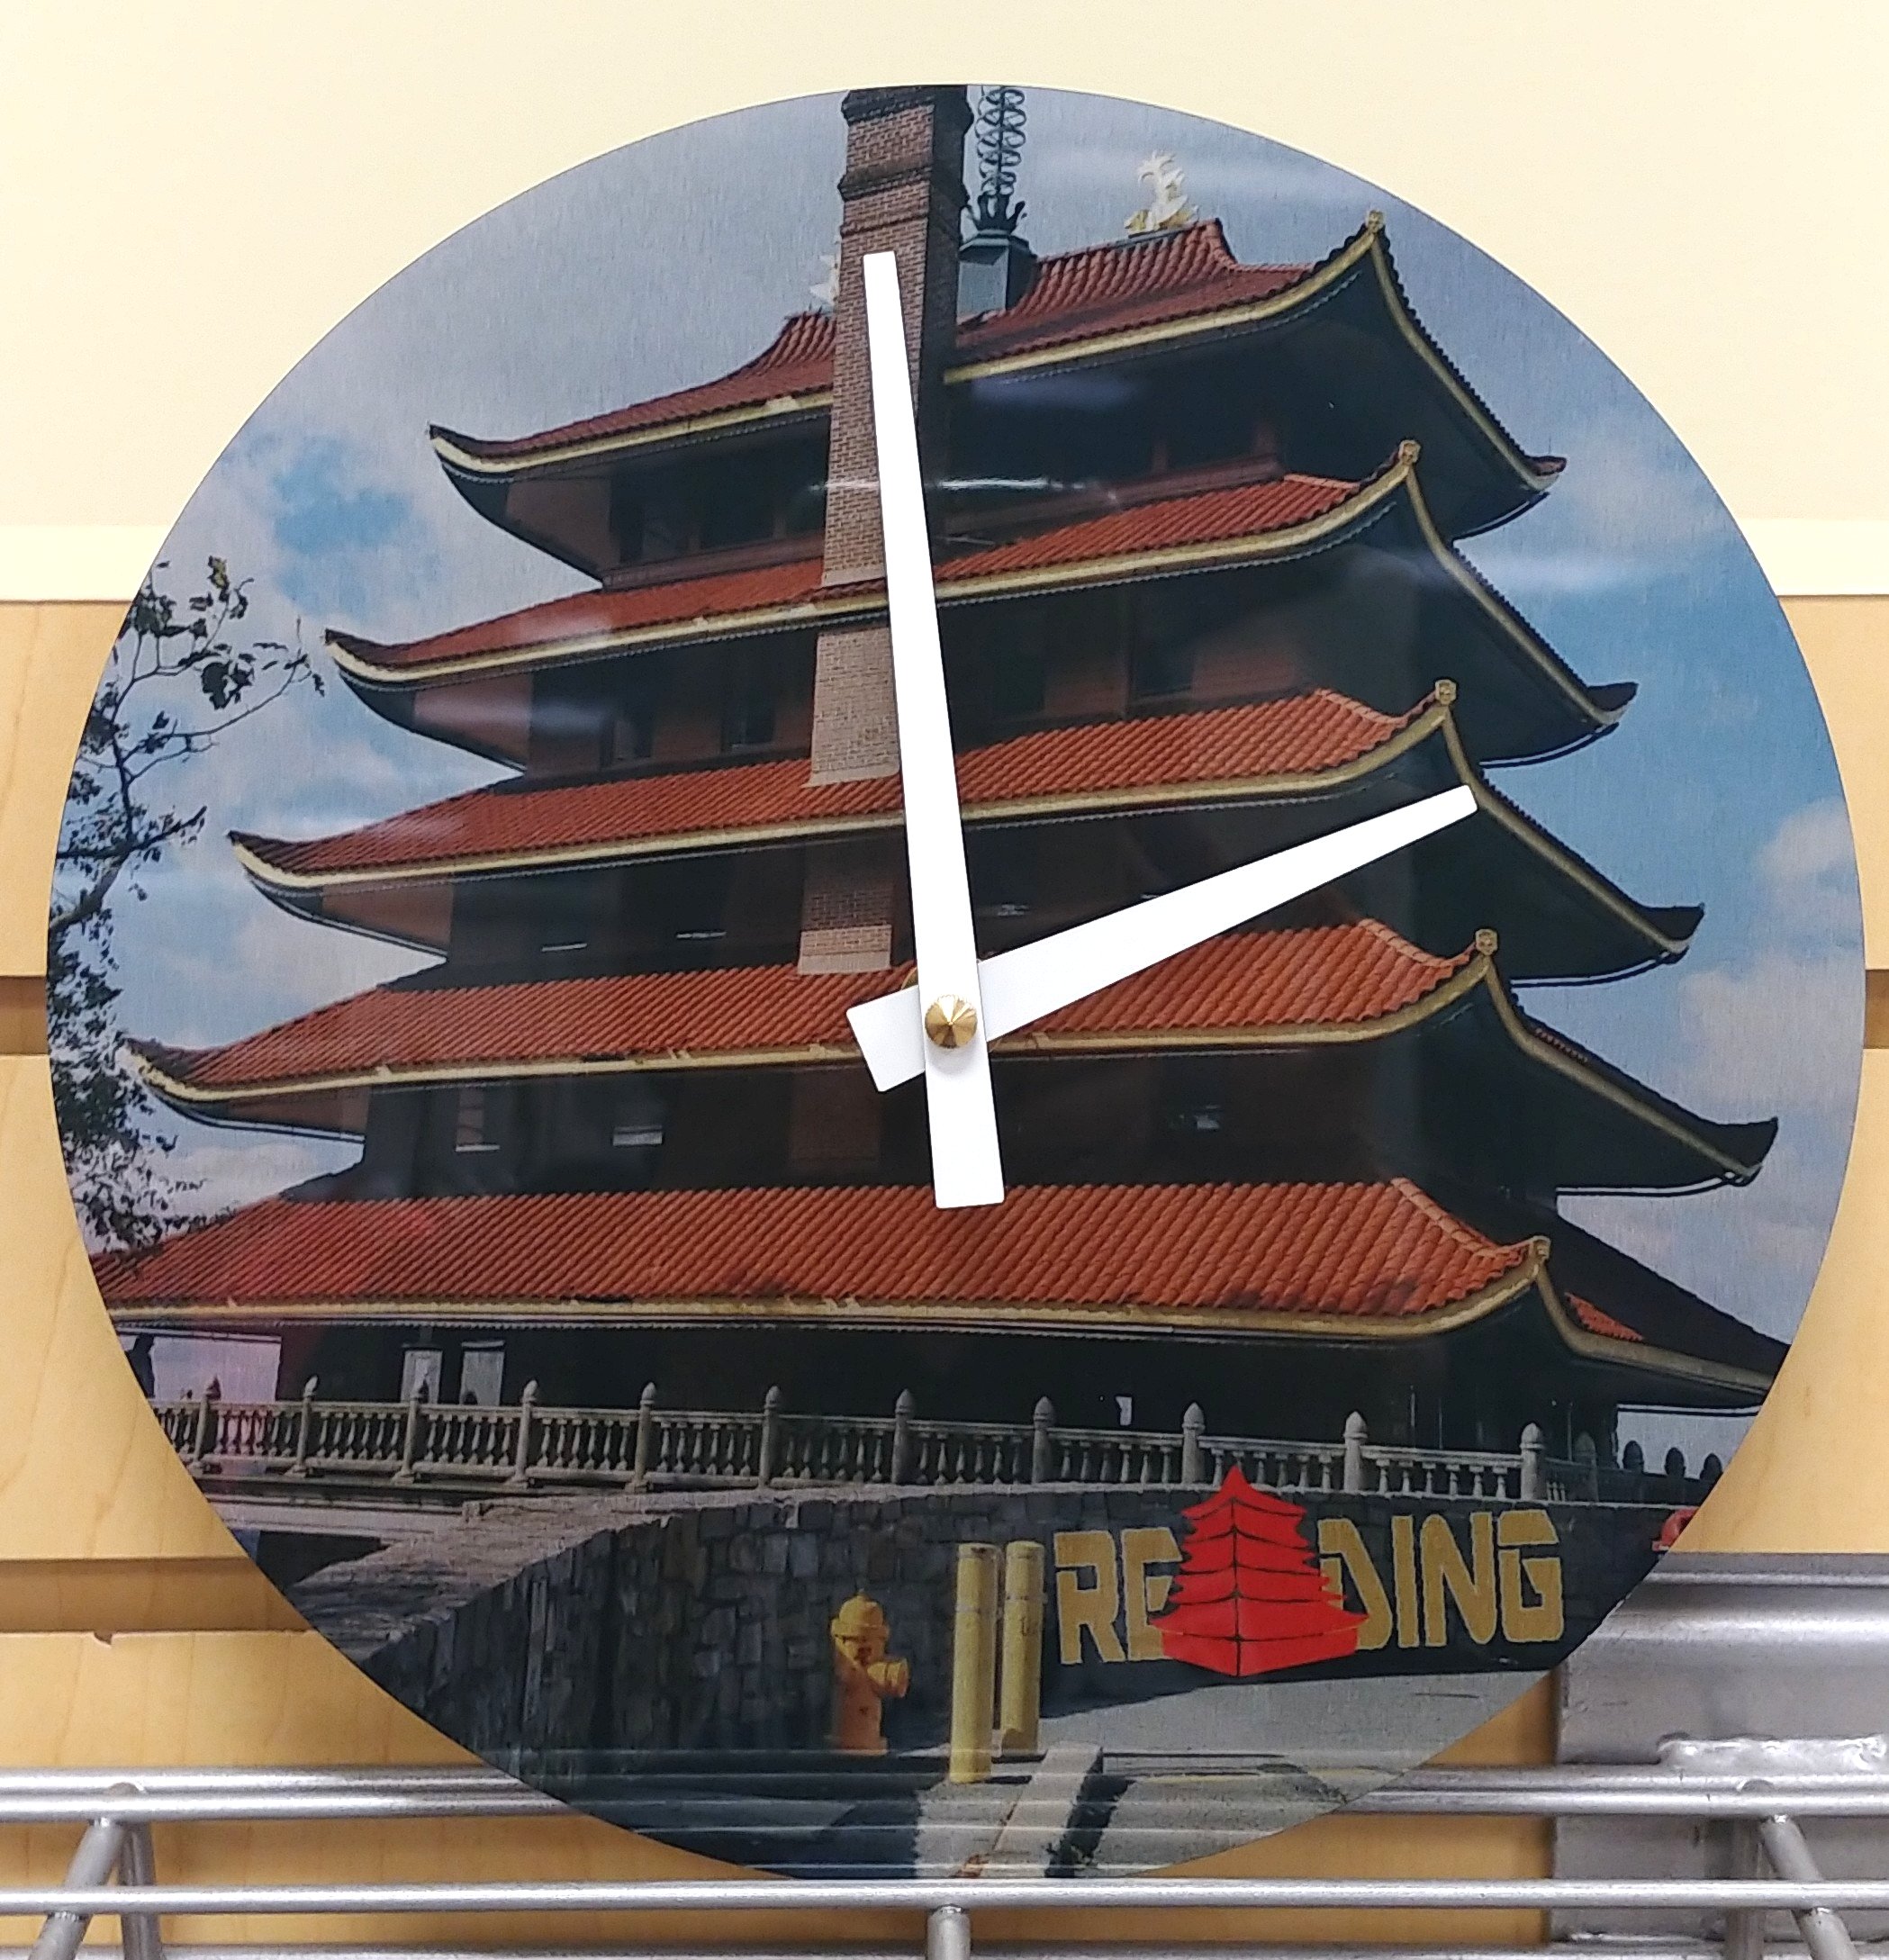 The Iconic Reading Pagoda in a Round Clock.